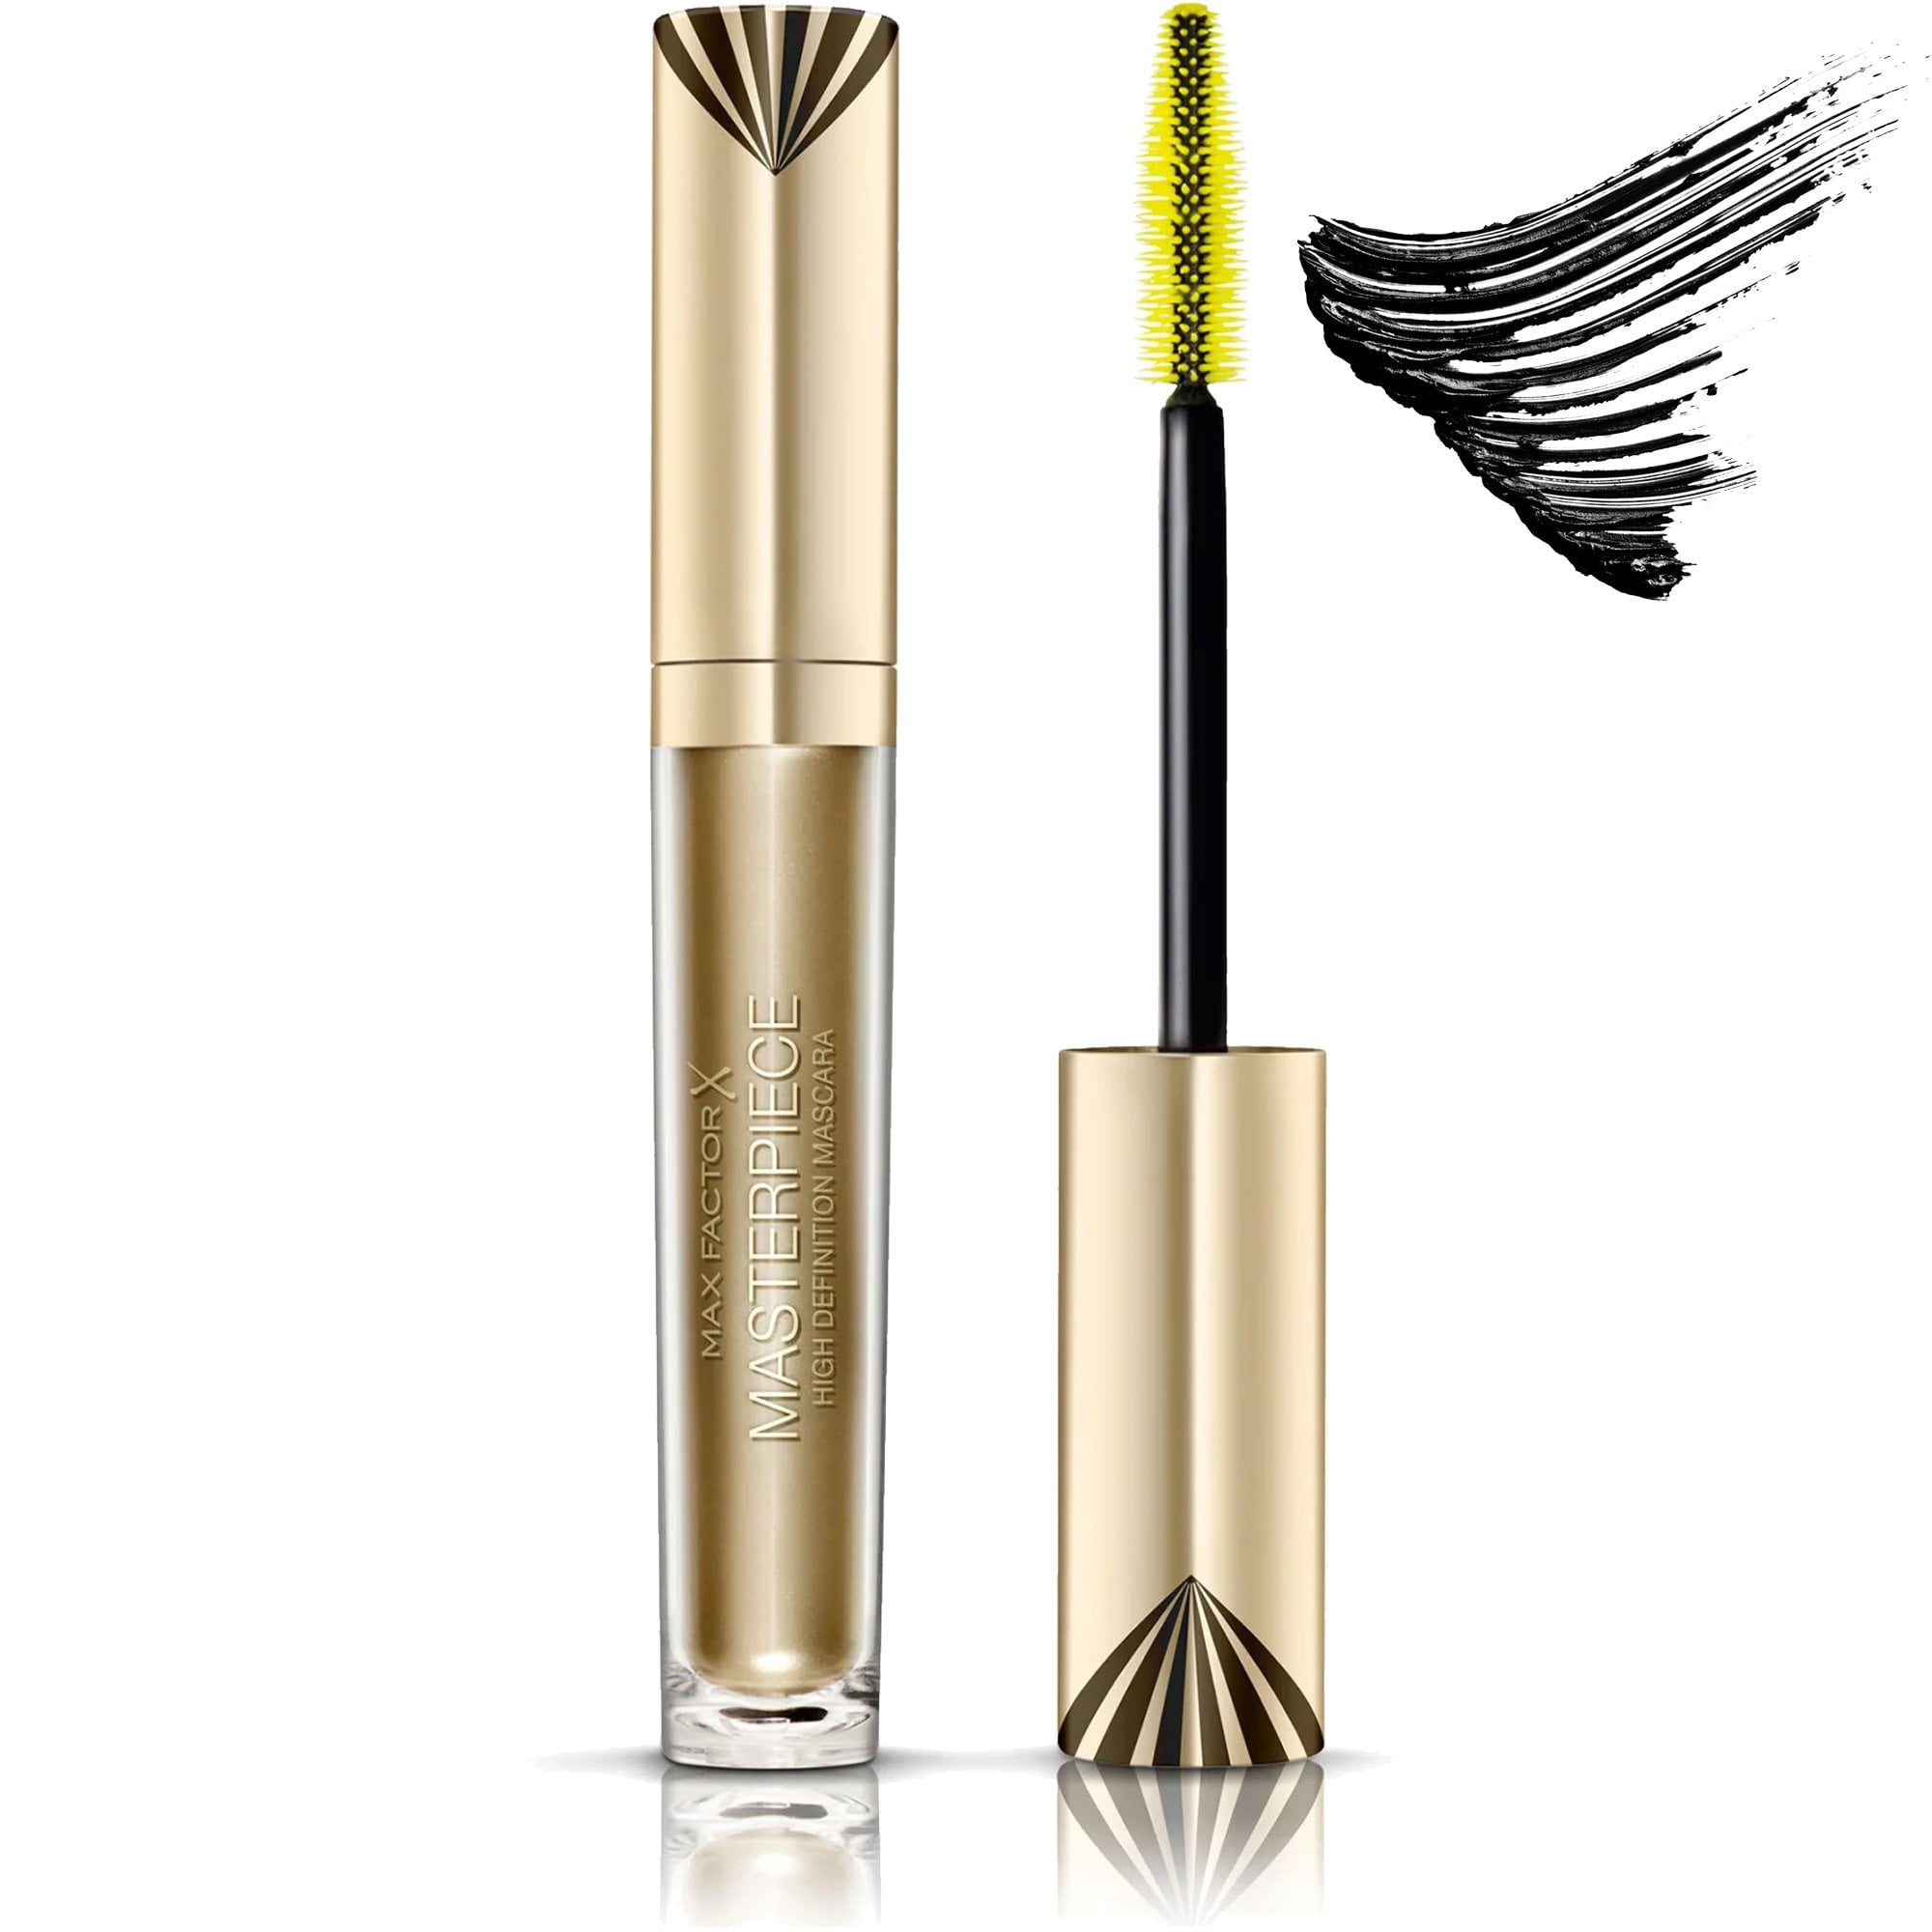 Masterpiece High Definition Mascara | Max Factor - Give Us Beauty